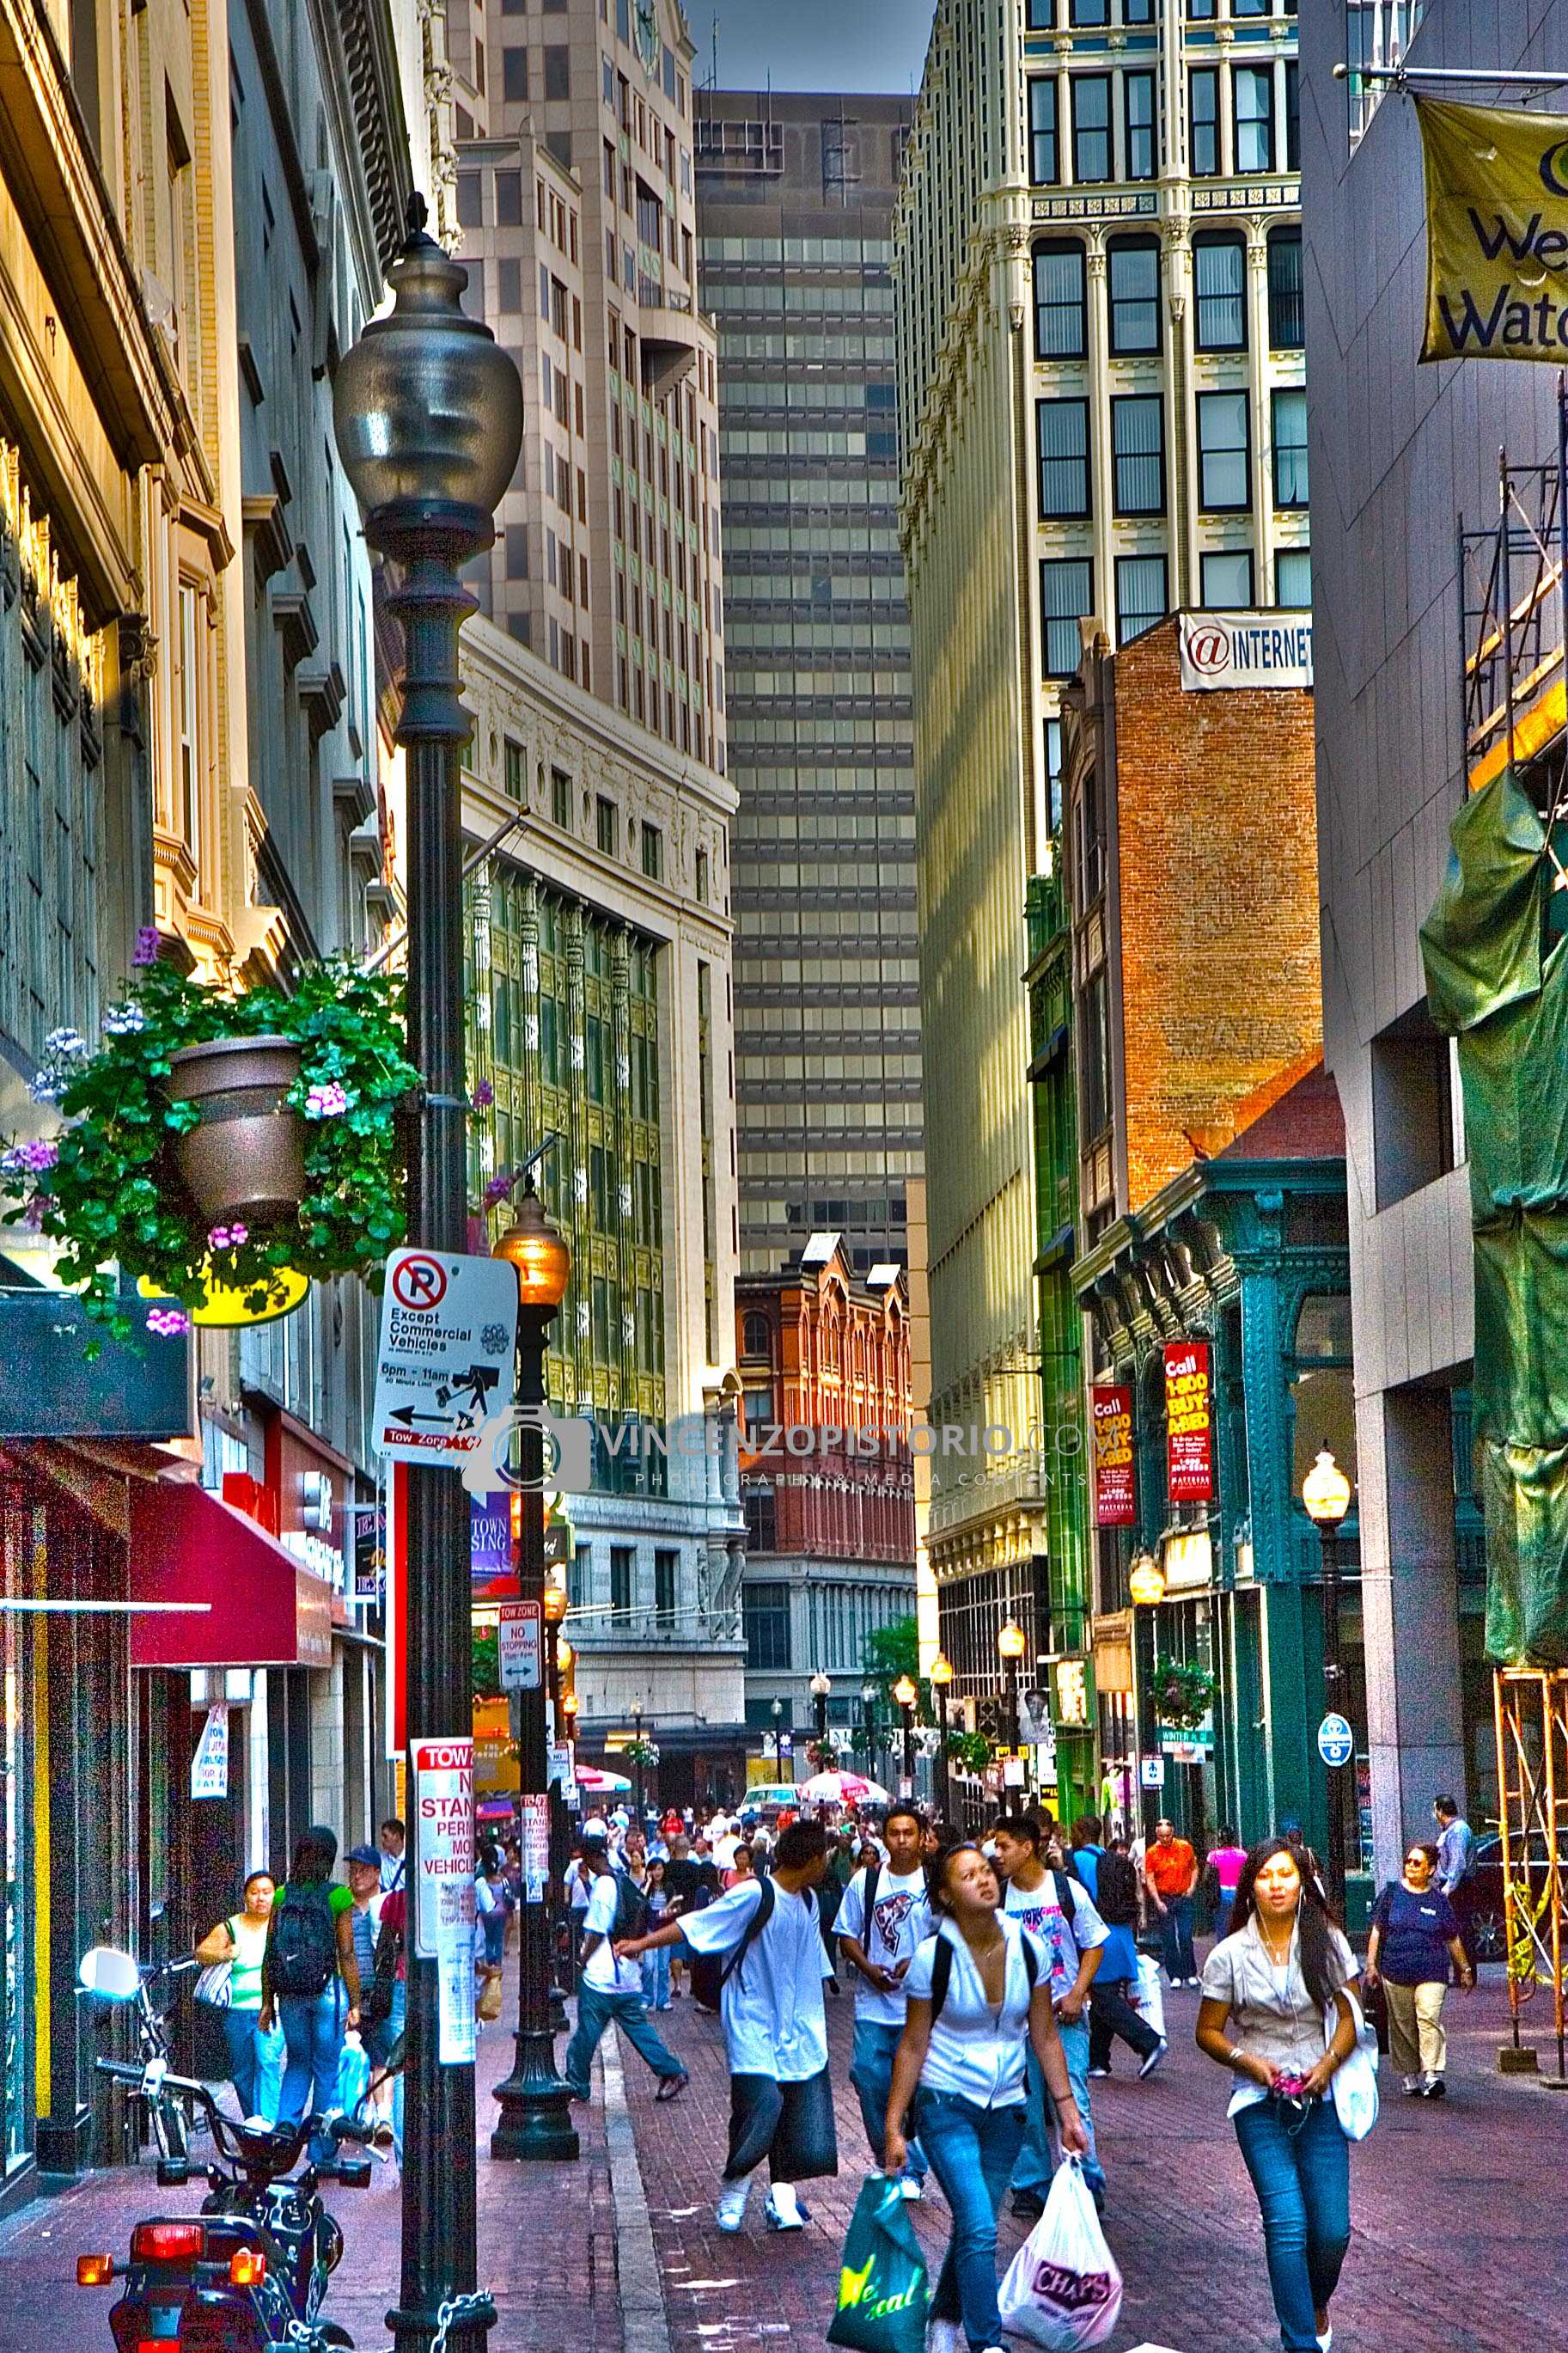 People on shopping – HDR